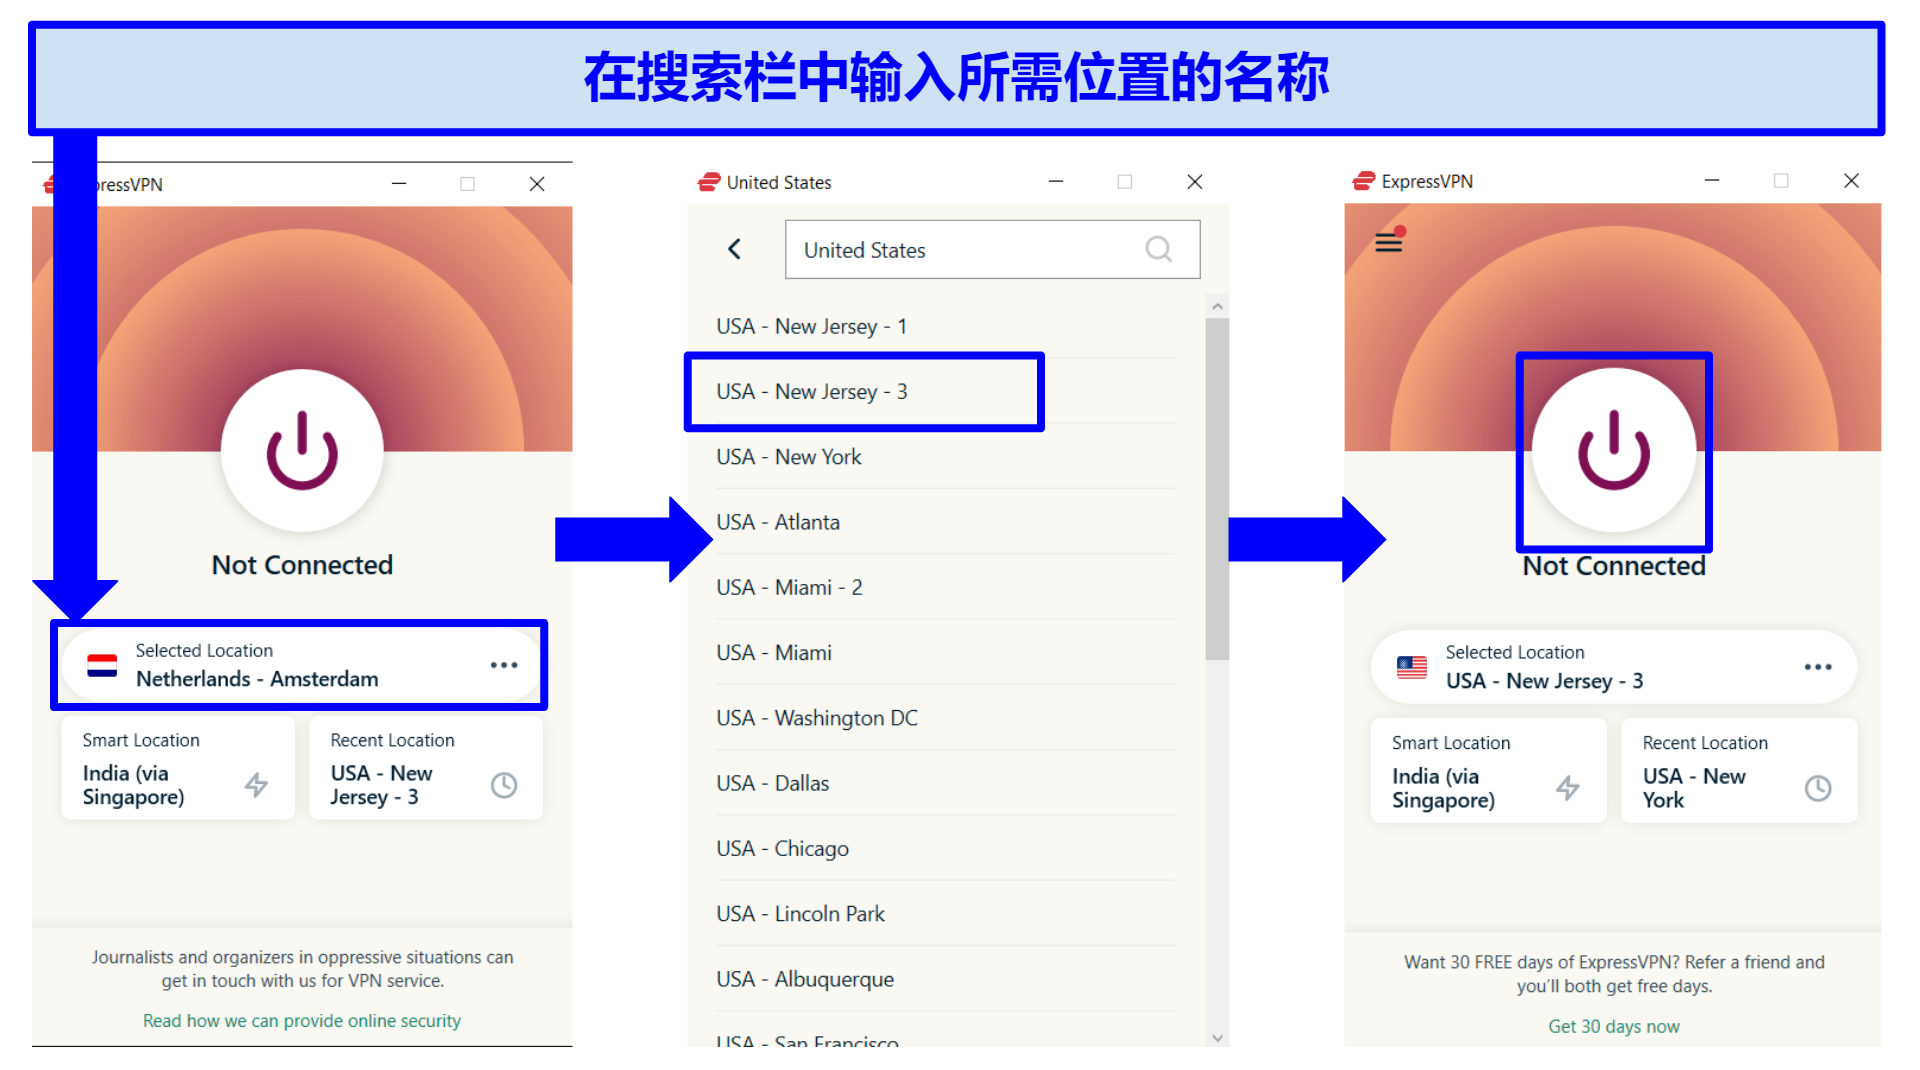 Image showing how to select and connect to a server on the ExpressVPN app interface.